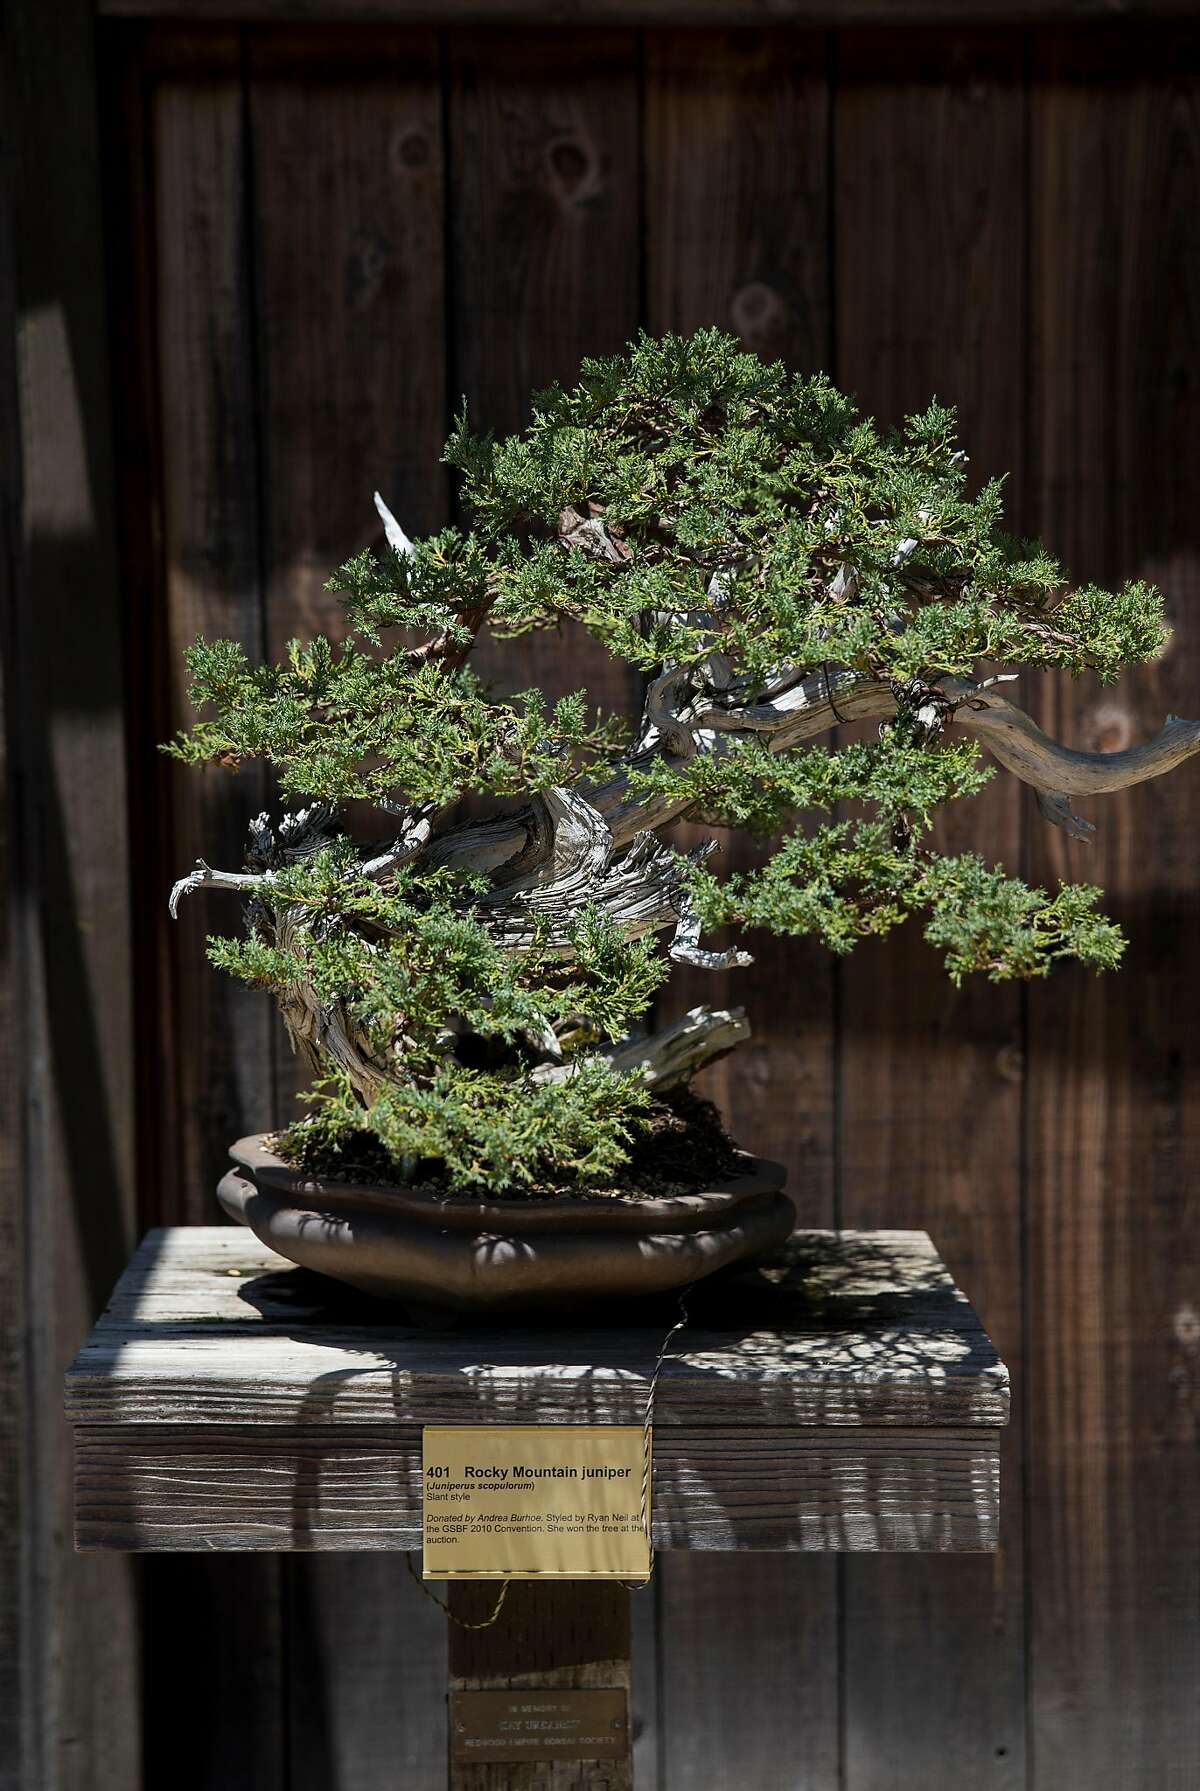 A bonsai tree is seen on display in the Bonsai Garden at Lake Merritt in Oakland, Calif., on Sunday, June 4, 2017. Admission to the garden is free although donations are welcomed.